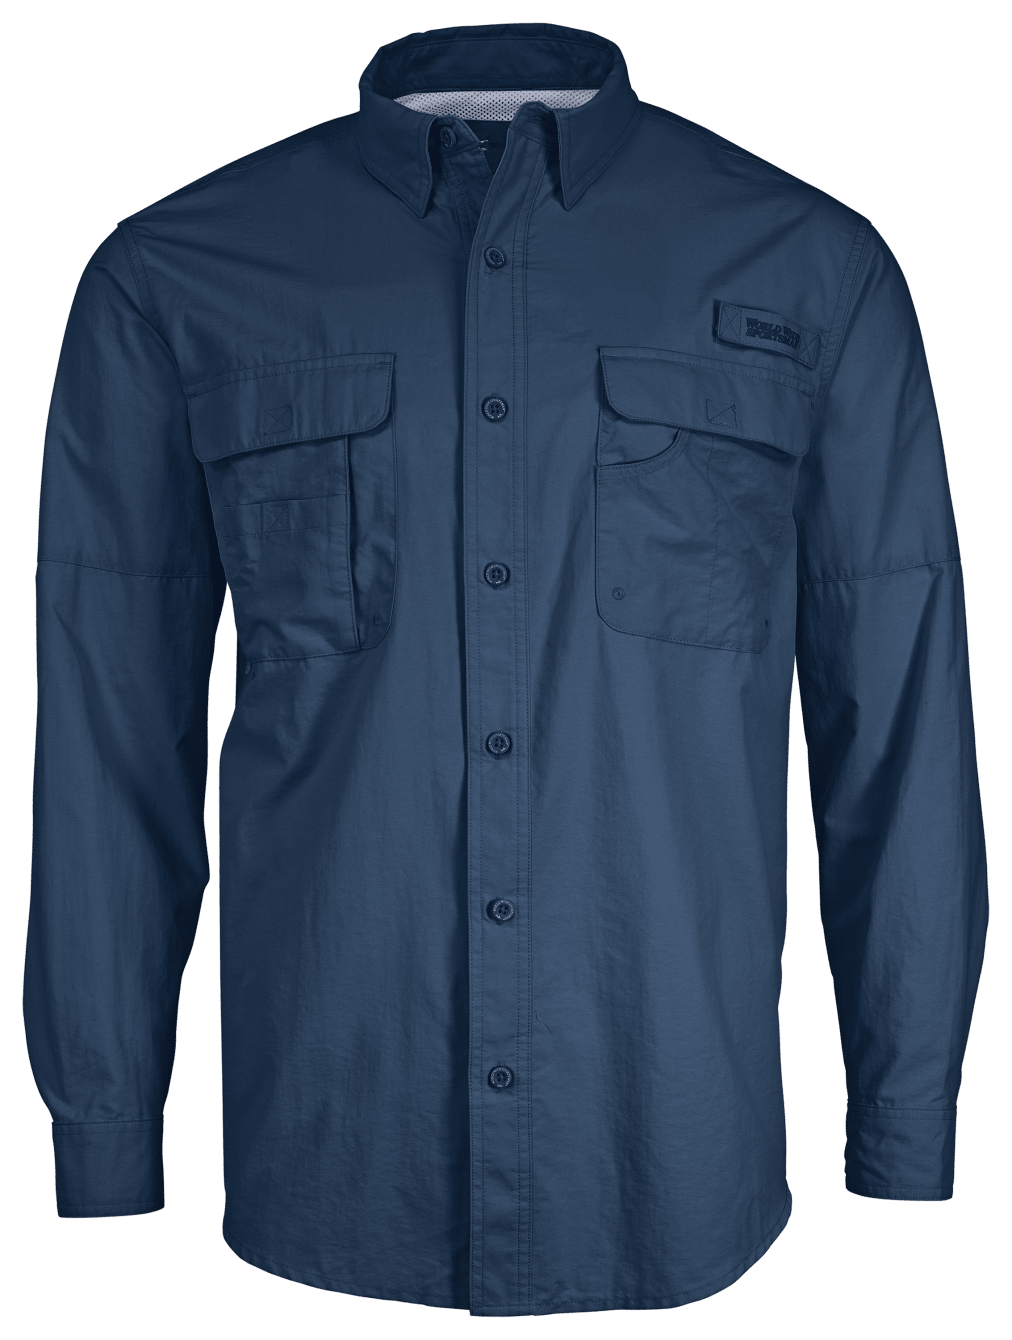 World Wide Sportsman Nylon Angler 2.0 Long-Sleeve Shirt for Men-Insignia Blue - fishing gifts for dads